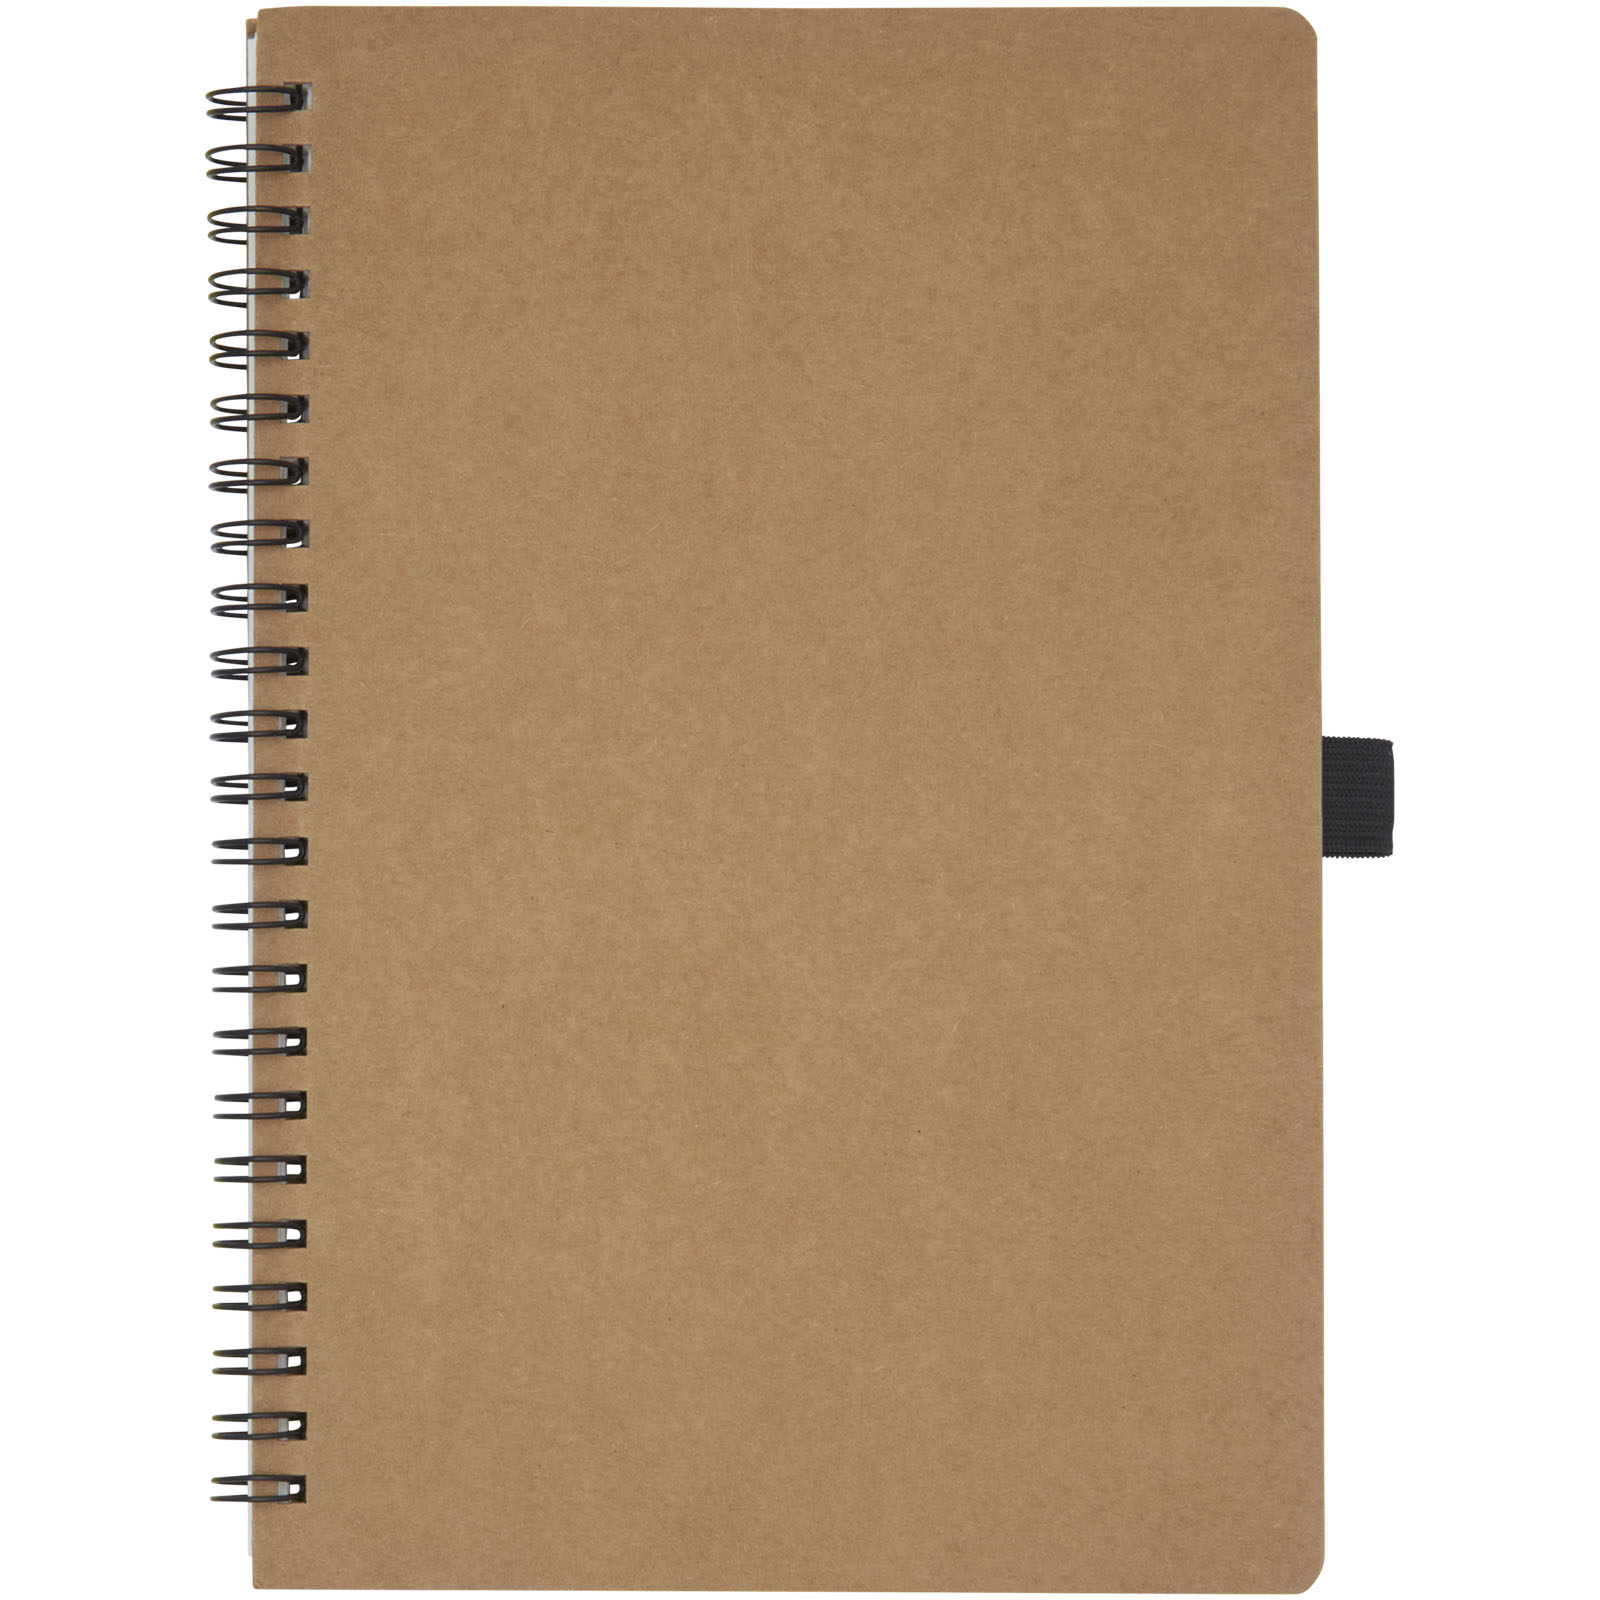 Advertising Notebooks - Cobble A5 wire-o recycled cardboard notebook with stone paper - 1